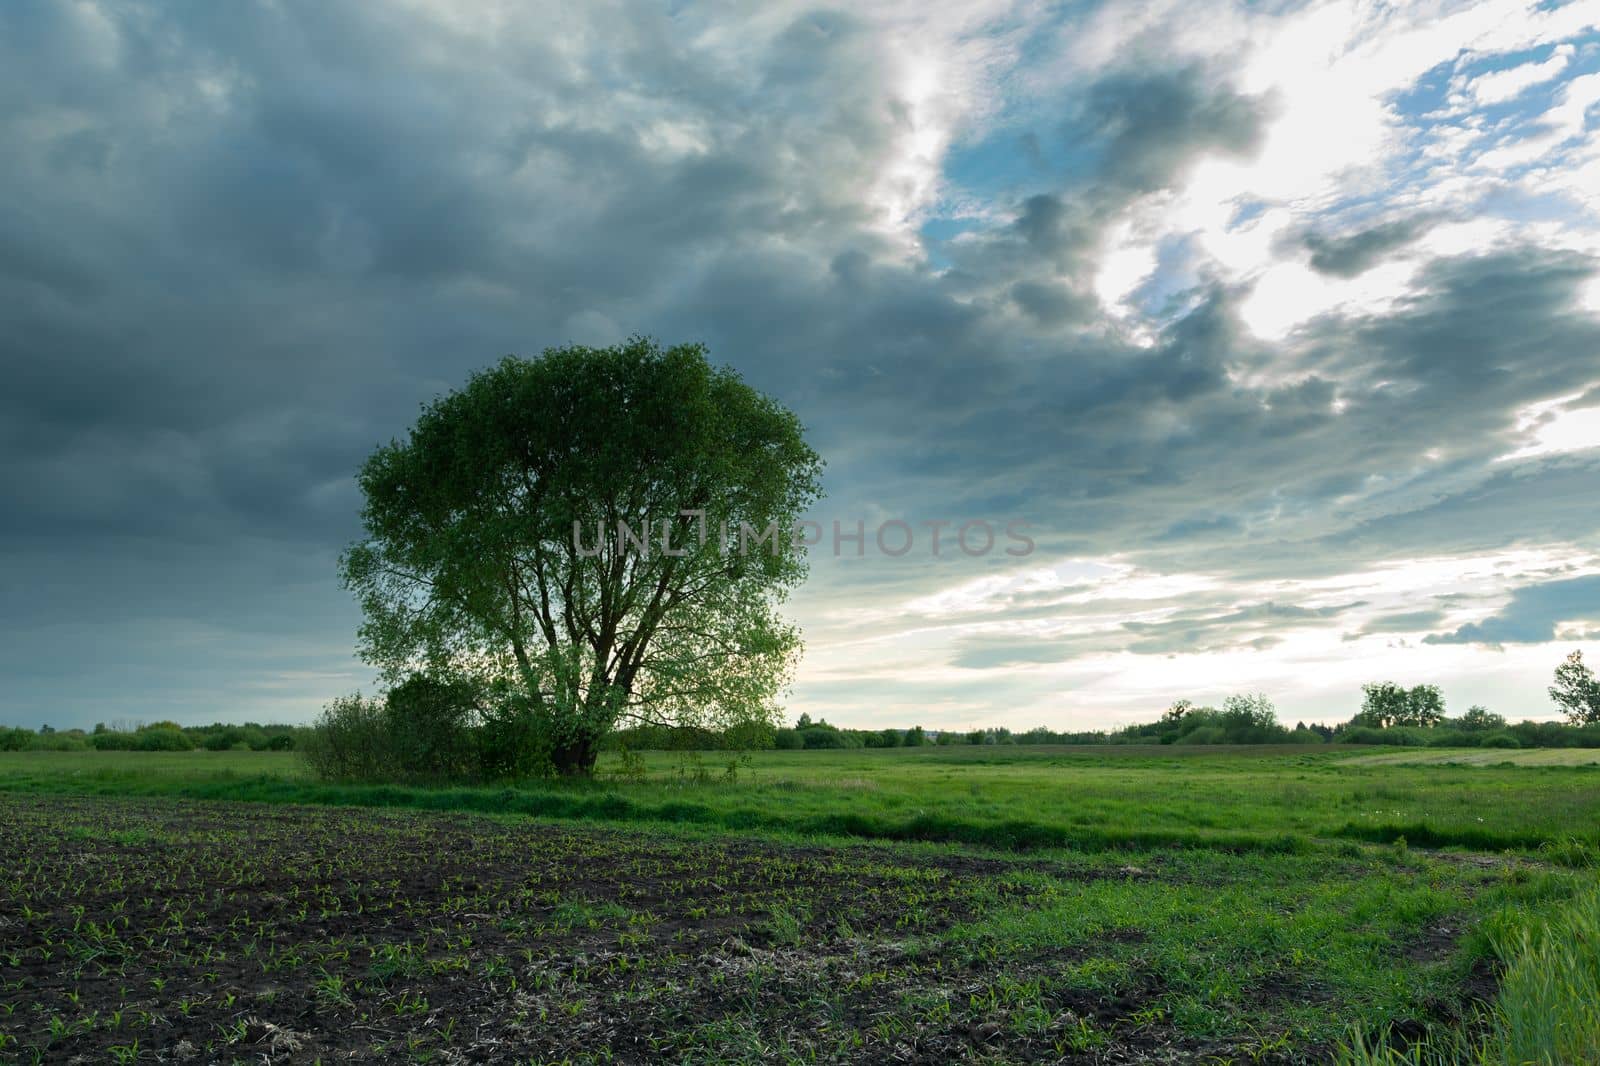 A farmland and a large tree, view on a cloudy day by darekb22